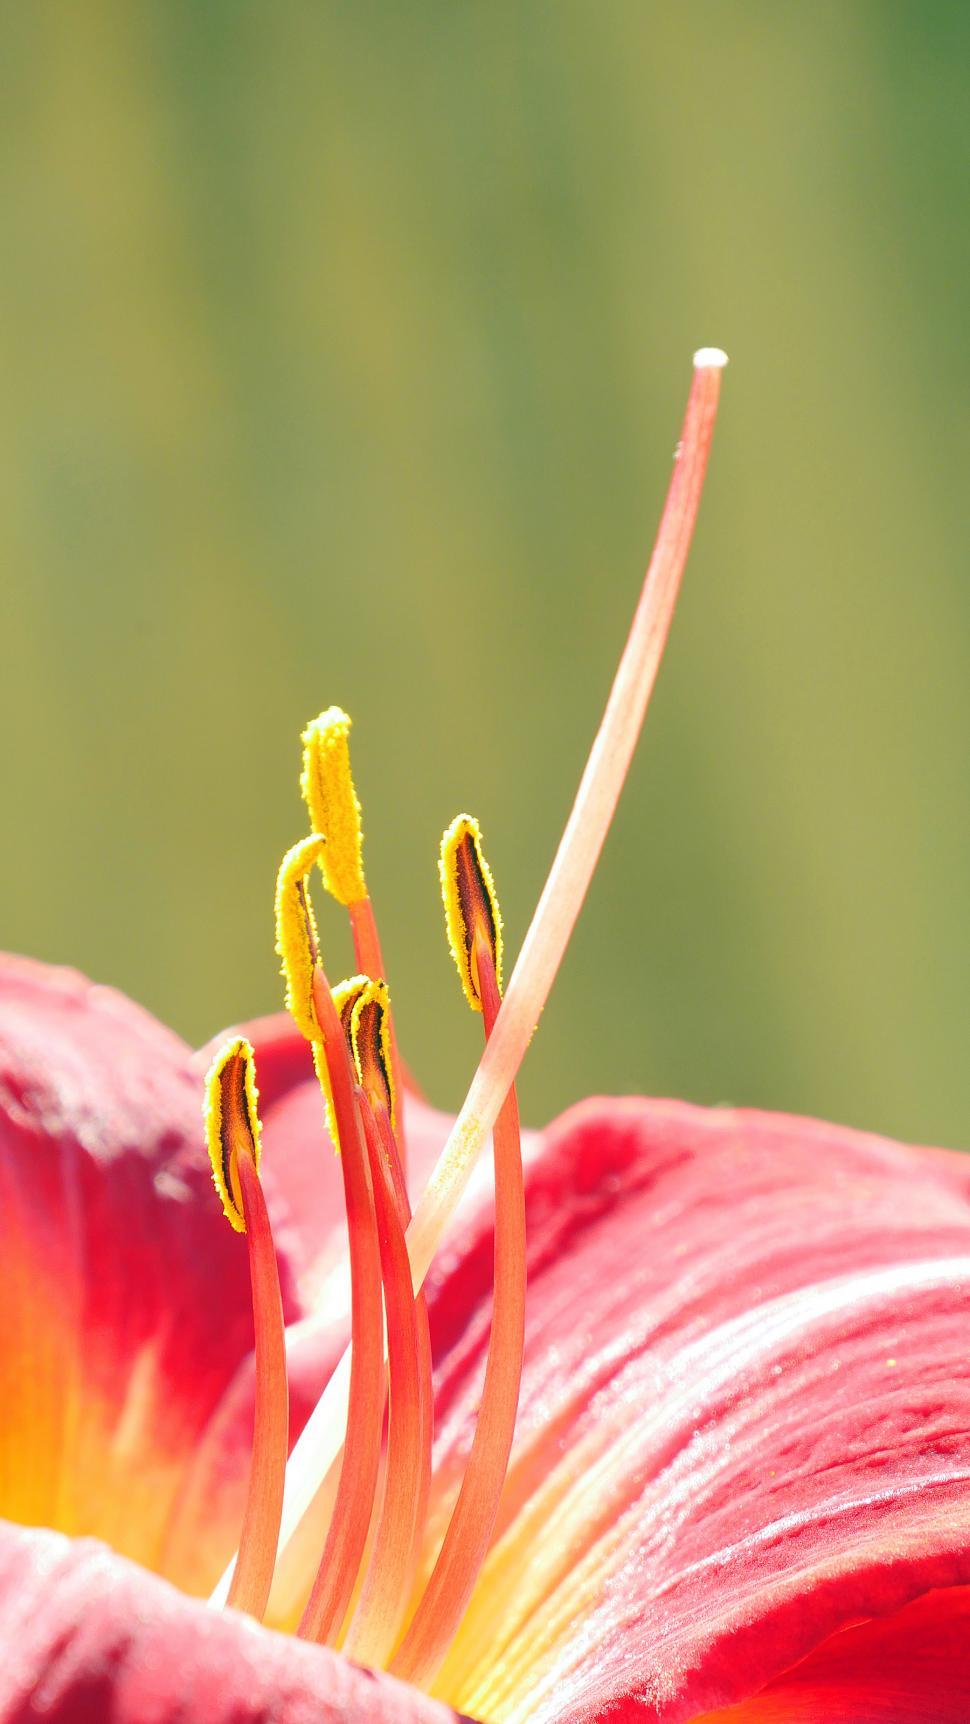 Free Image of Colorful Day Lily Flower Macro 